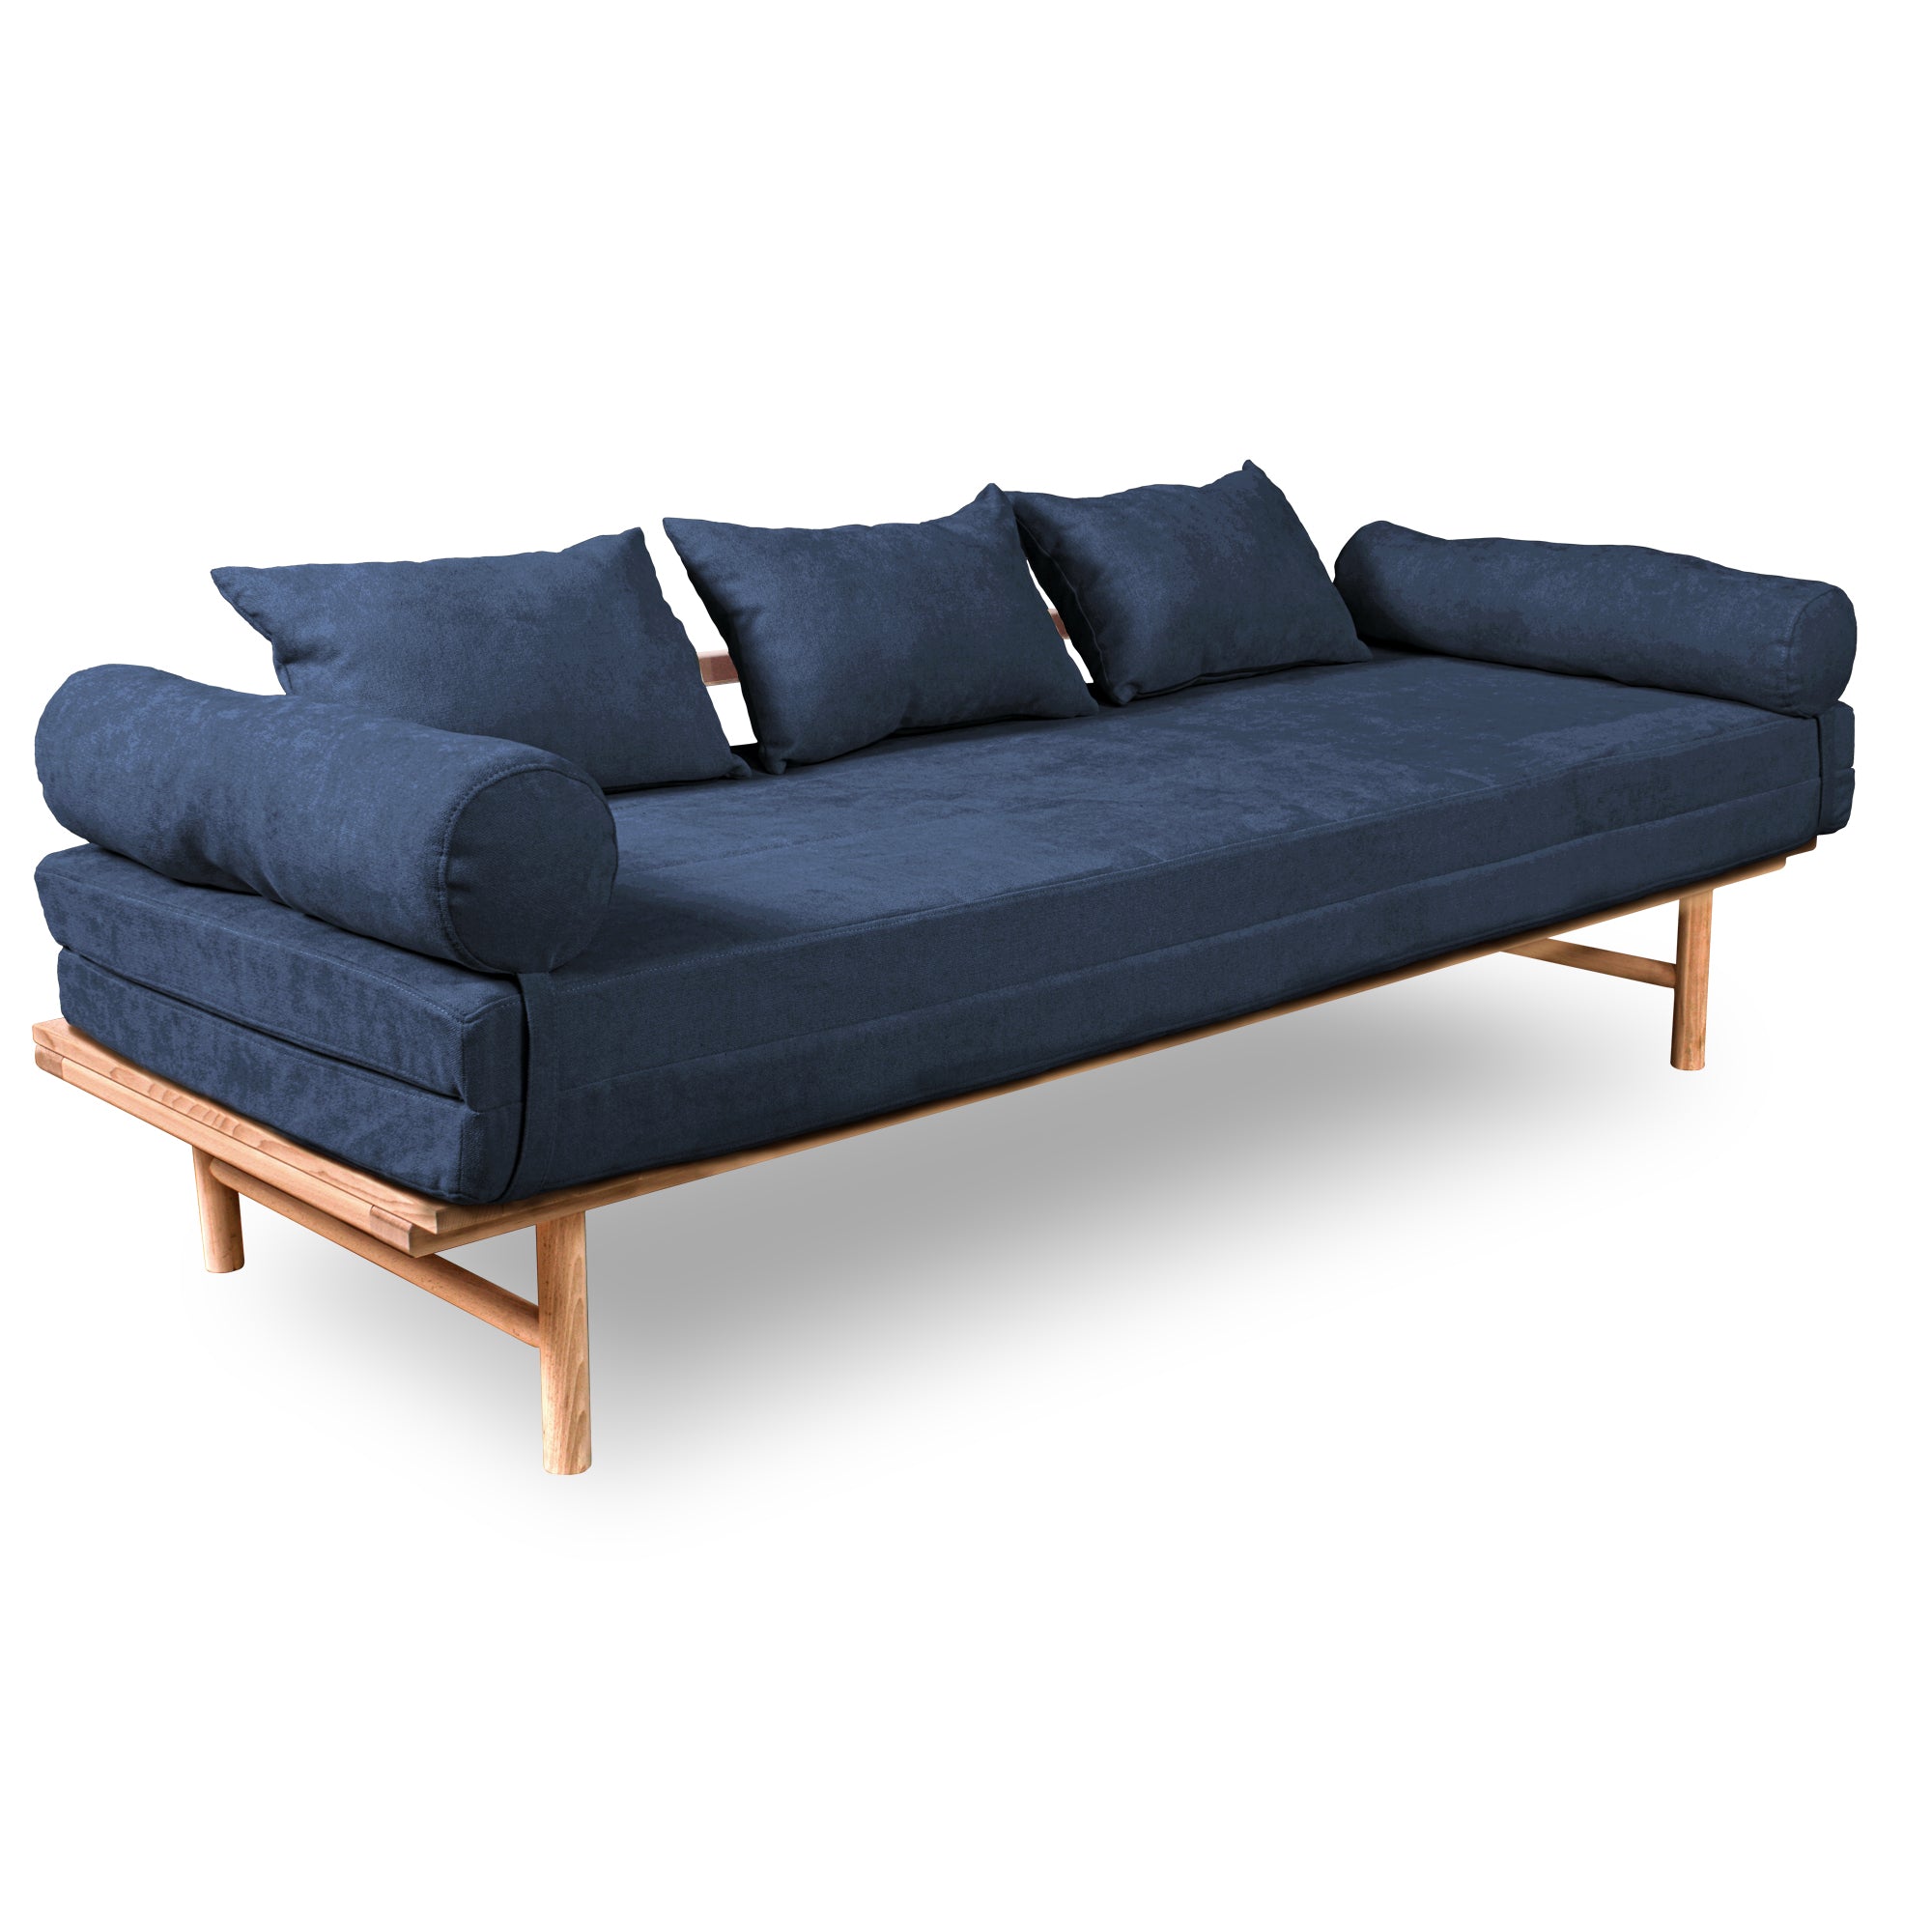 Le MAR Folding Daybed, Beech Wood Frame, Natural Colour-upholstery blue